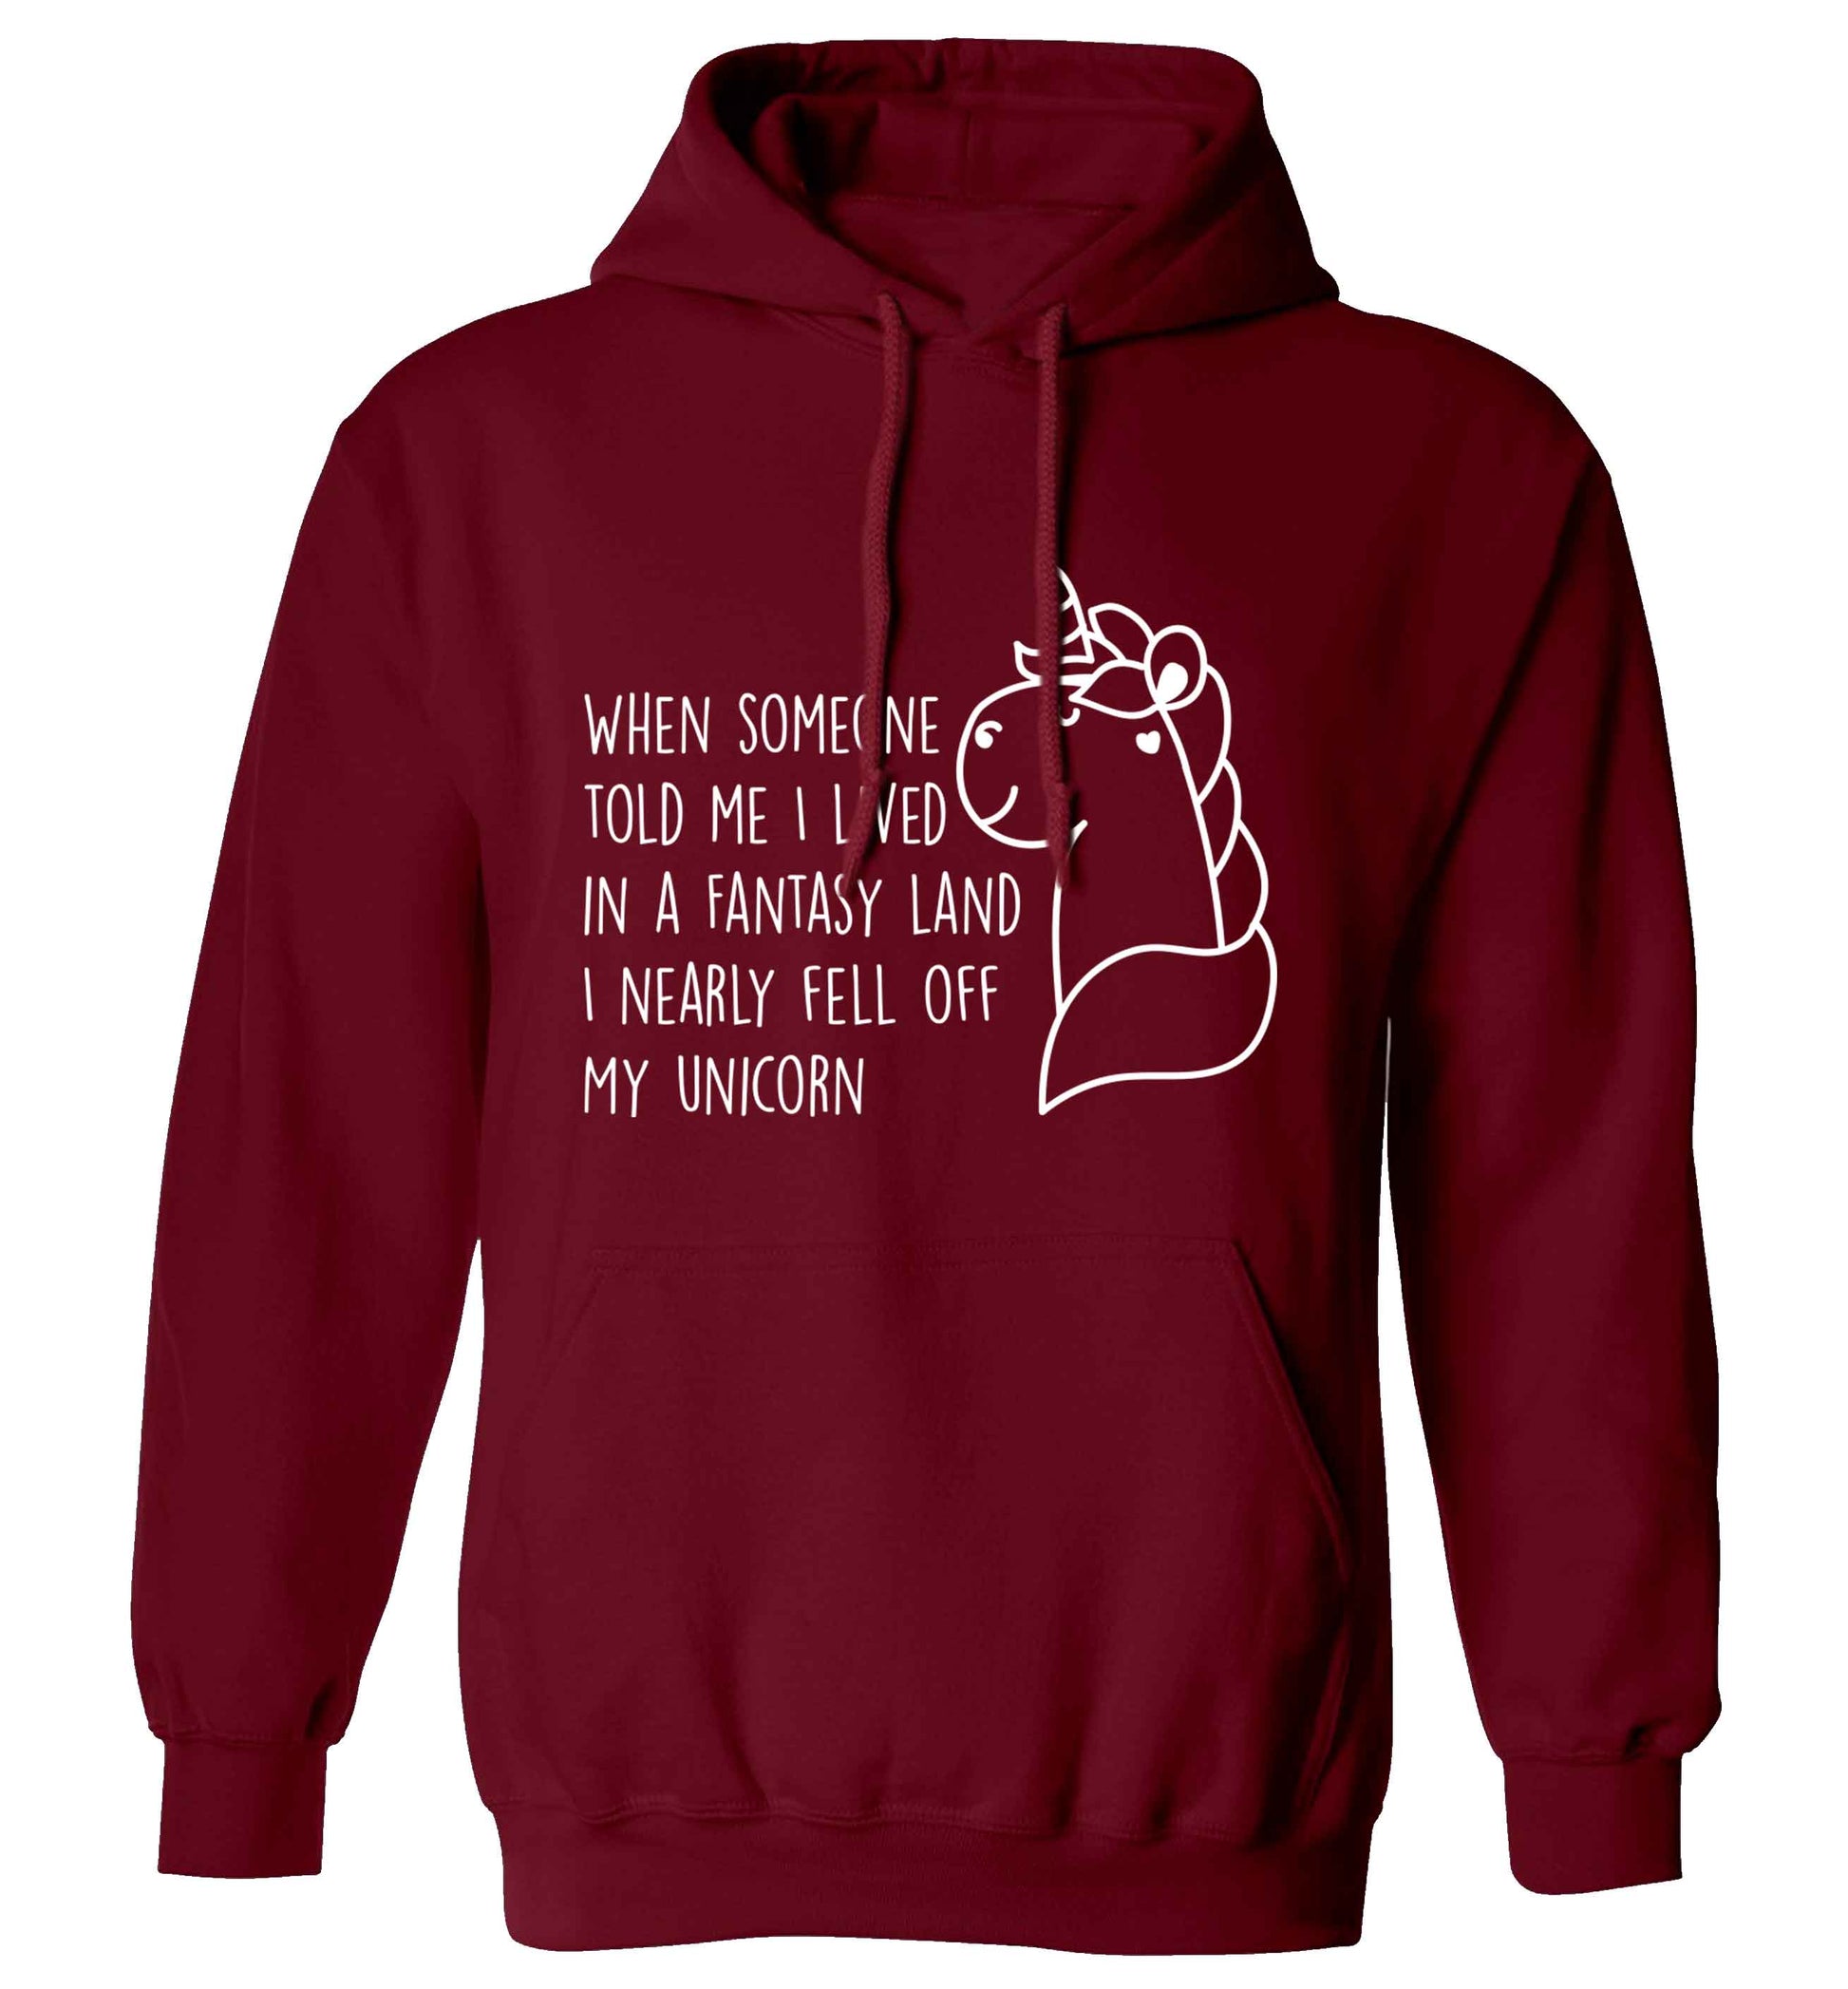 When somebody told me I lived in a fantasy land I nearly fell of my unicorn adults unisex maroon hoodie 2XL